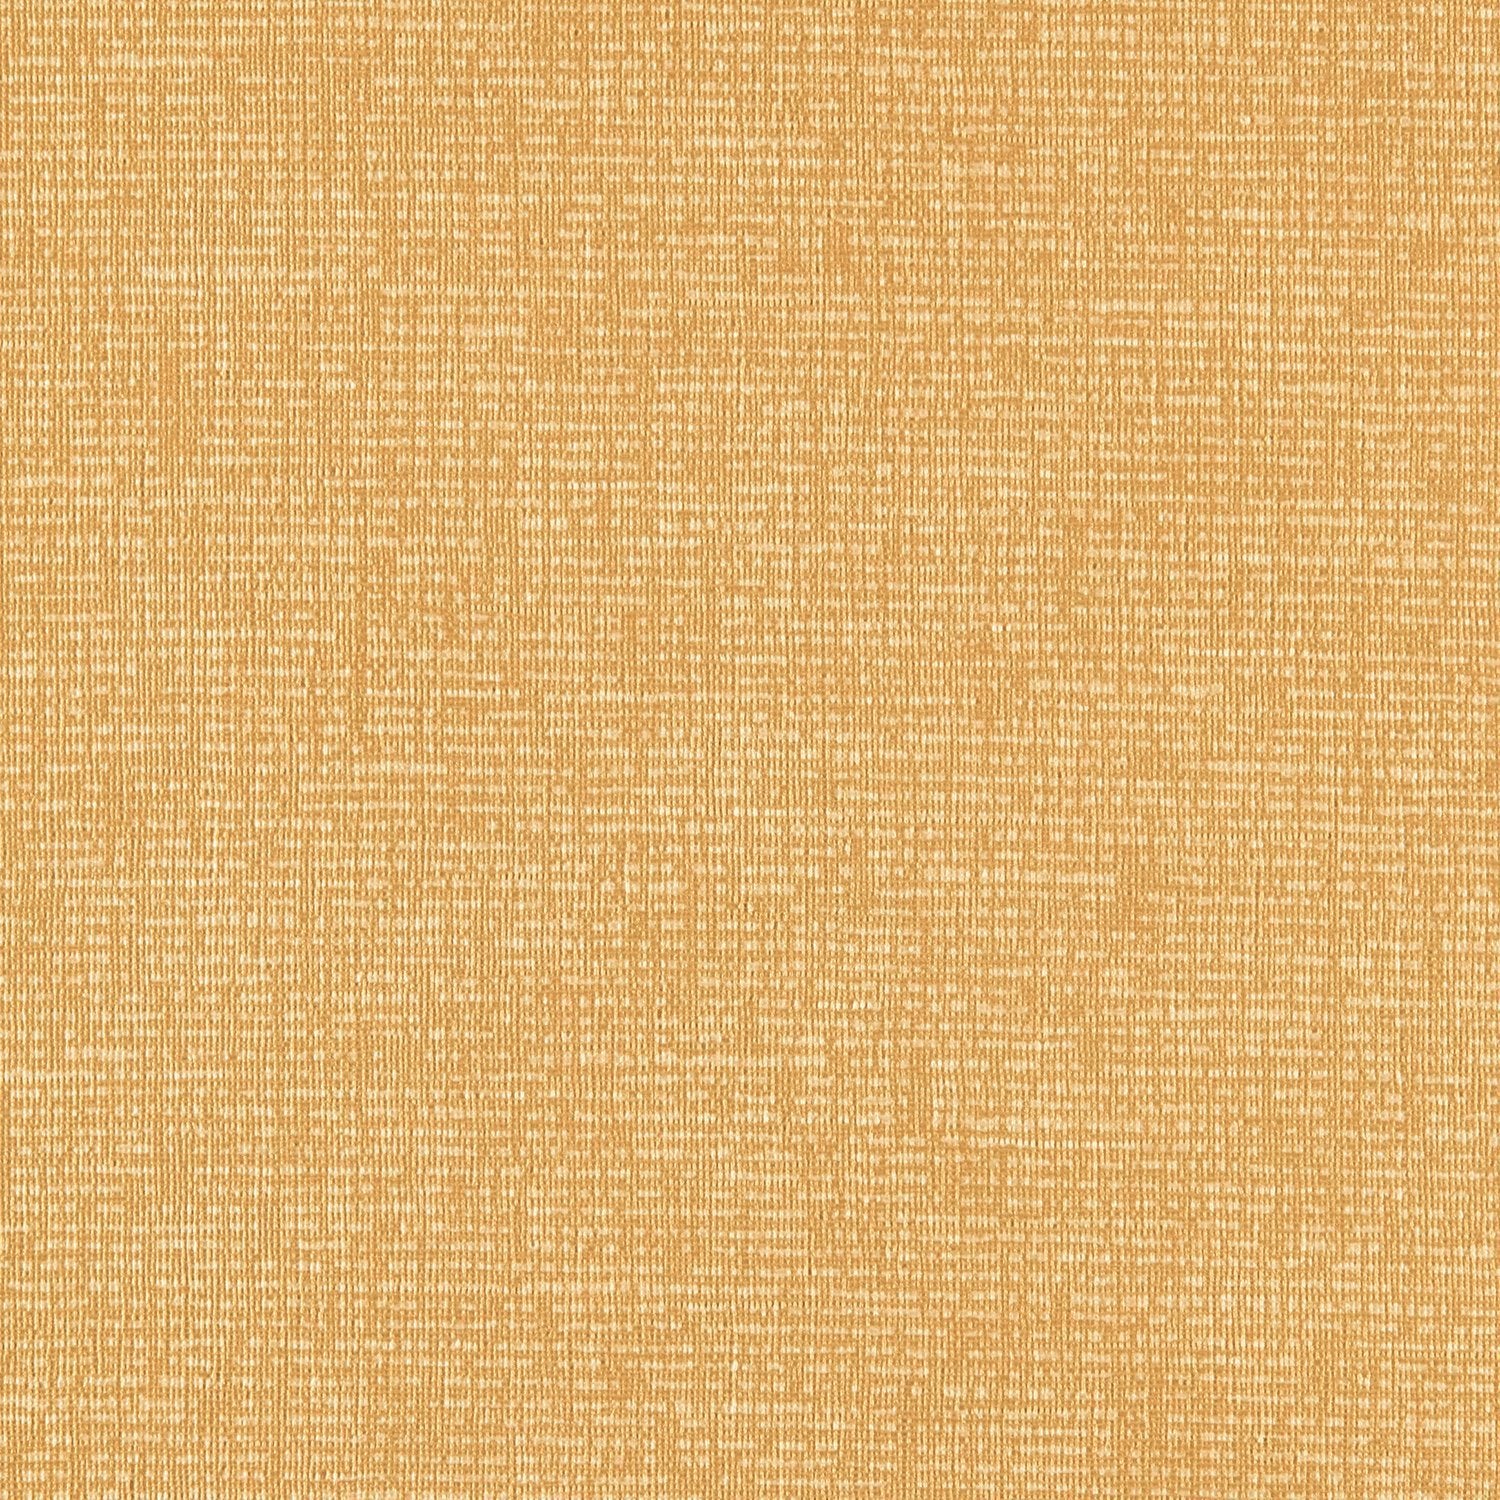 Spectrum - Y46921 - Wallcovering - Vycon - Kube Contract